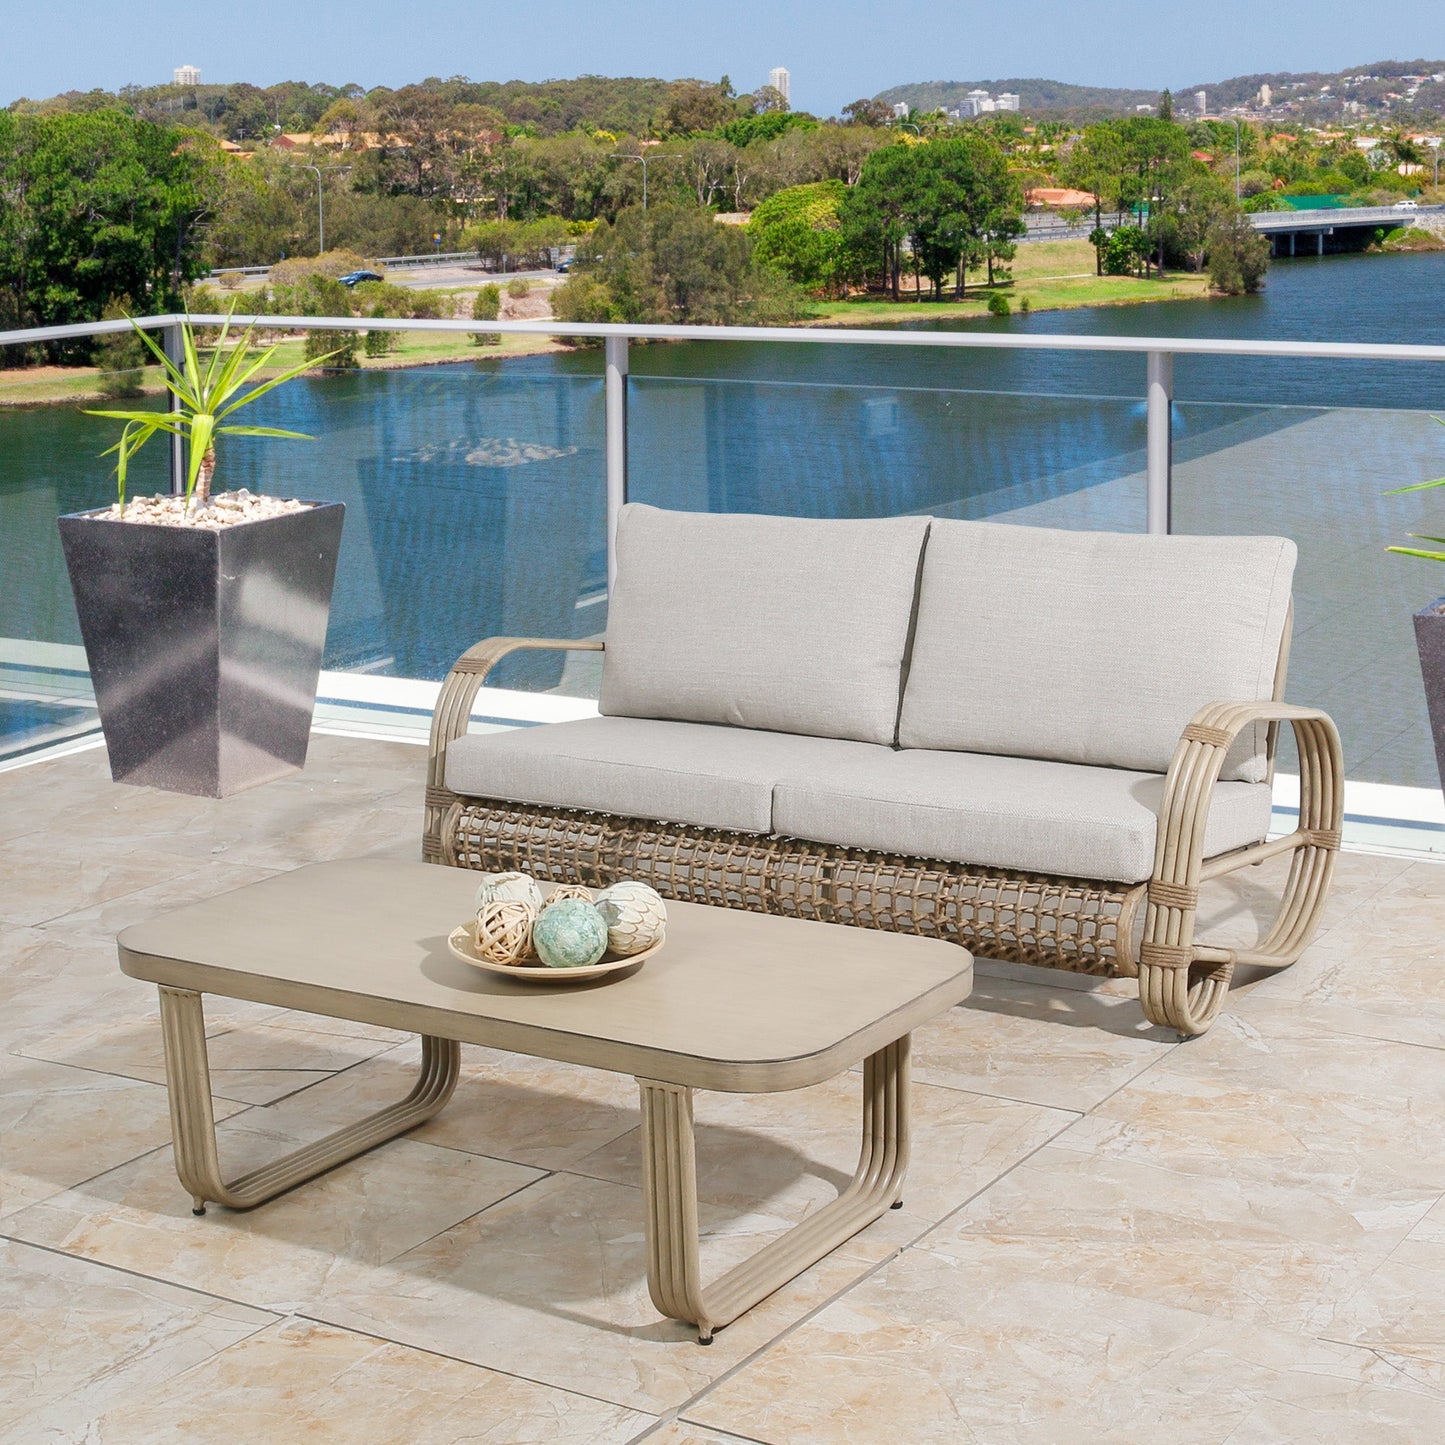 2 Pieces Patio Aluminum Conversation Set Outdoor Loveseat Sofa and coffee table with Wicker Decoration and Cushions